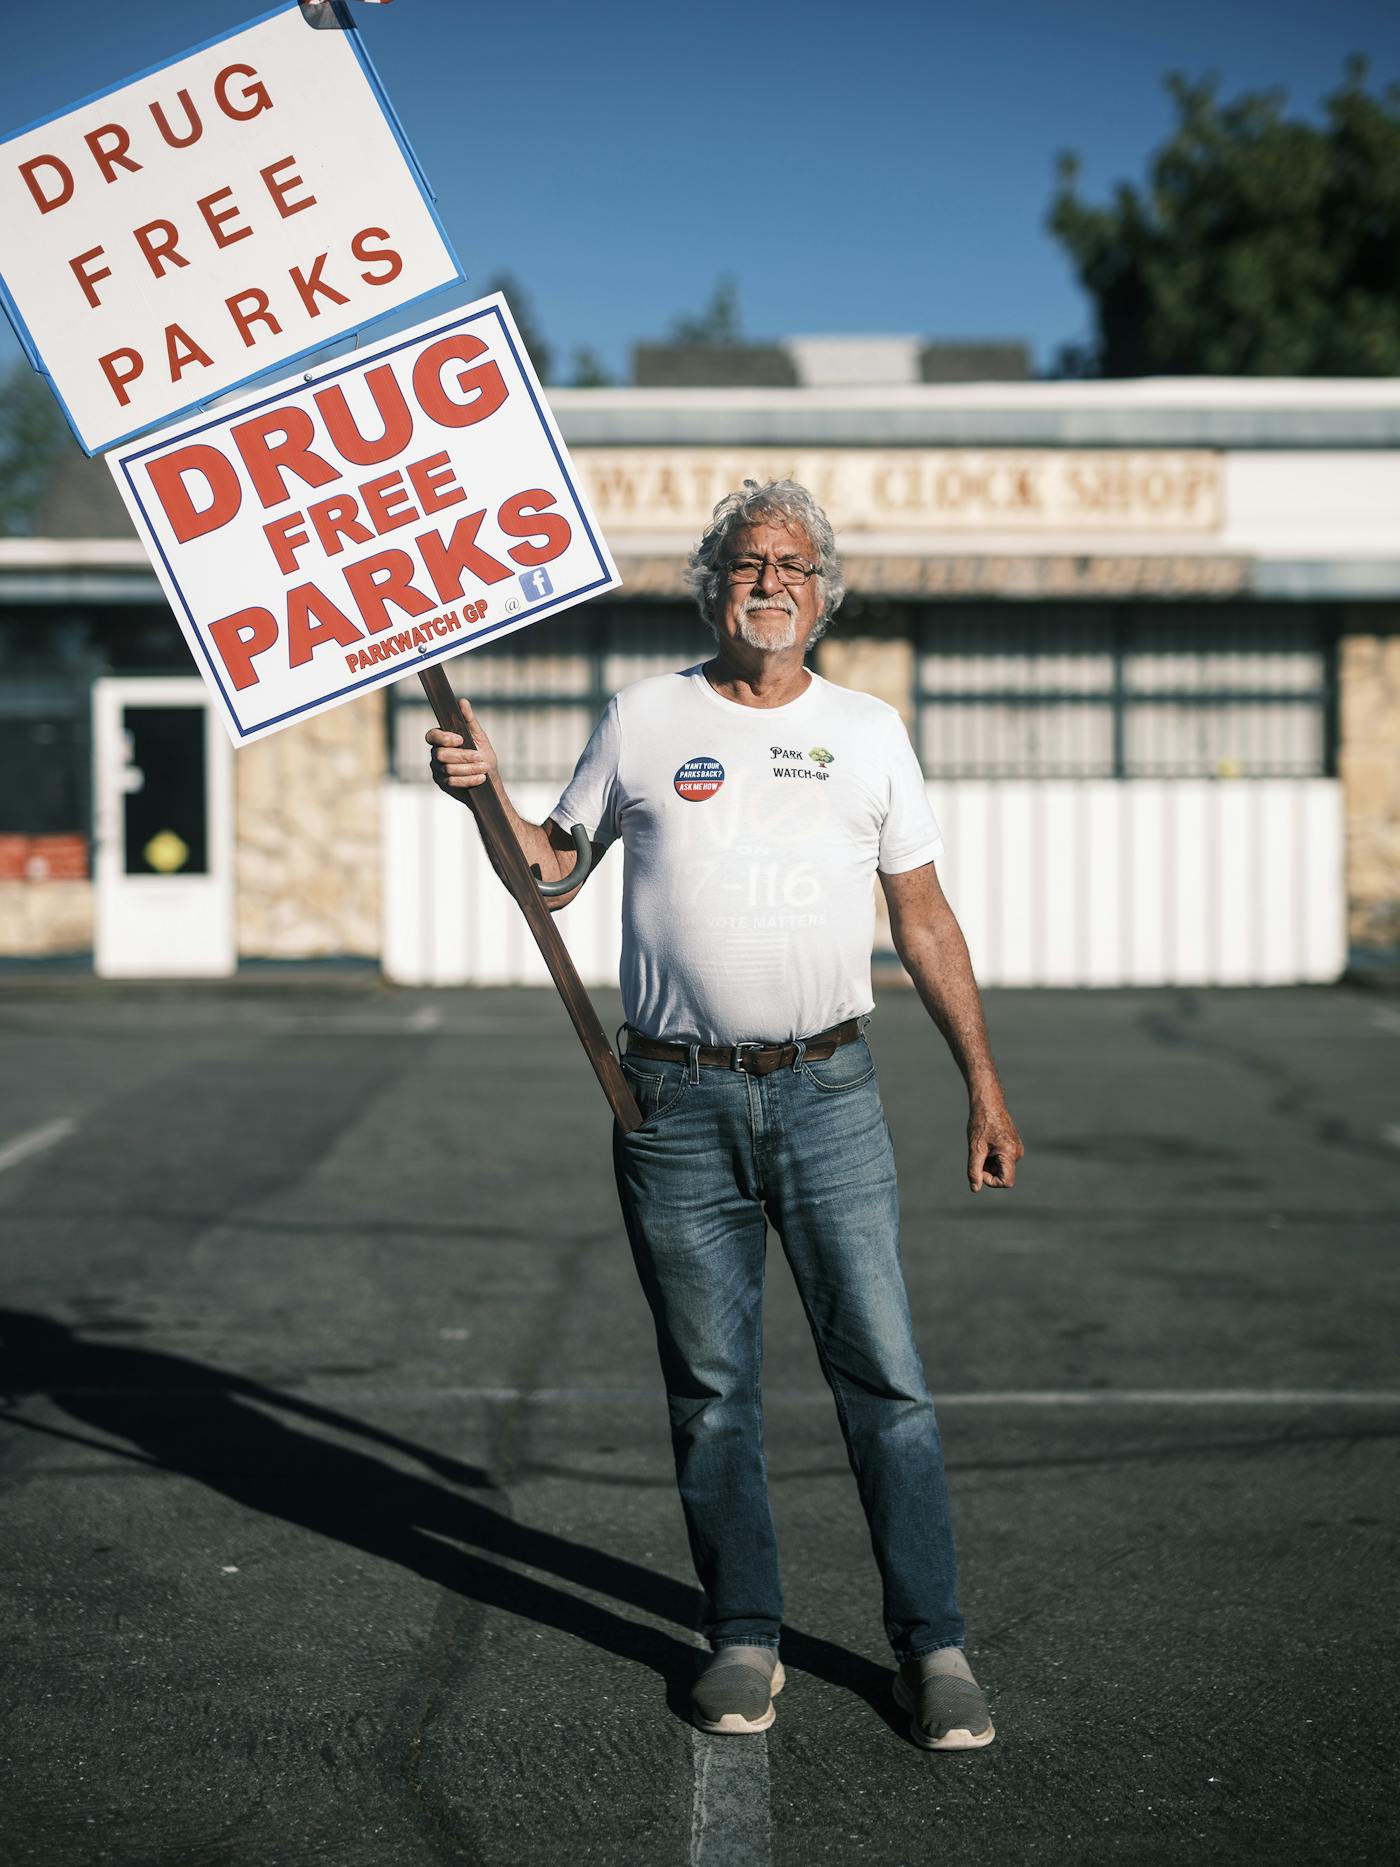 Bryan Welden a member of Grants Pass Park Watch, protested outside of the meeting